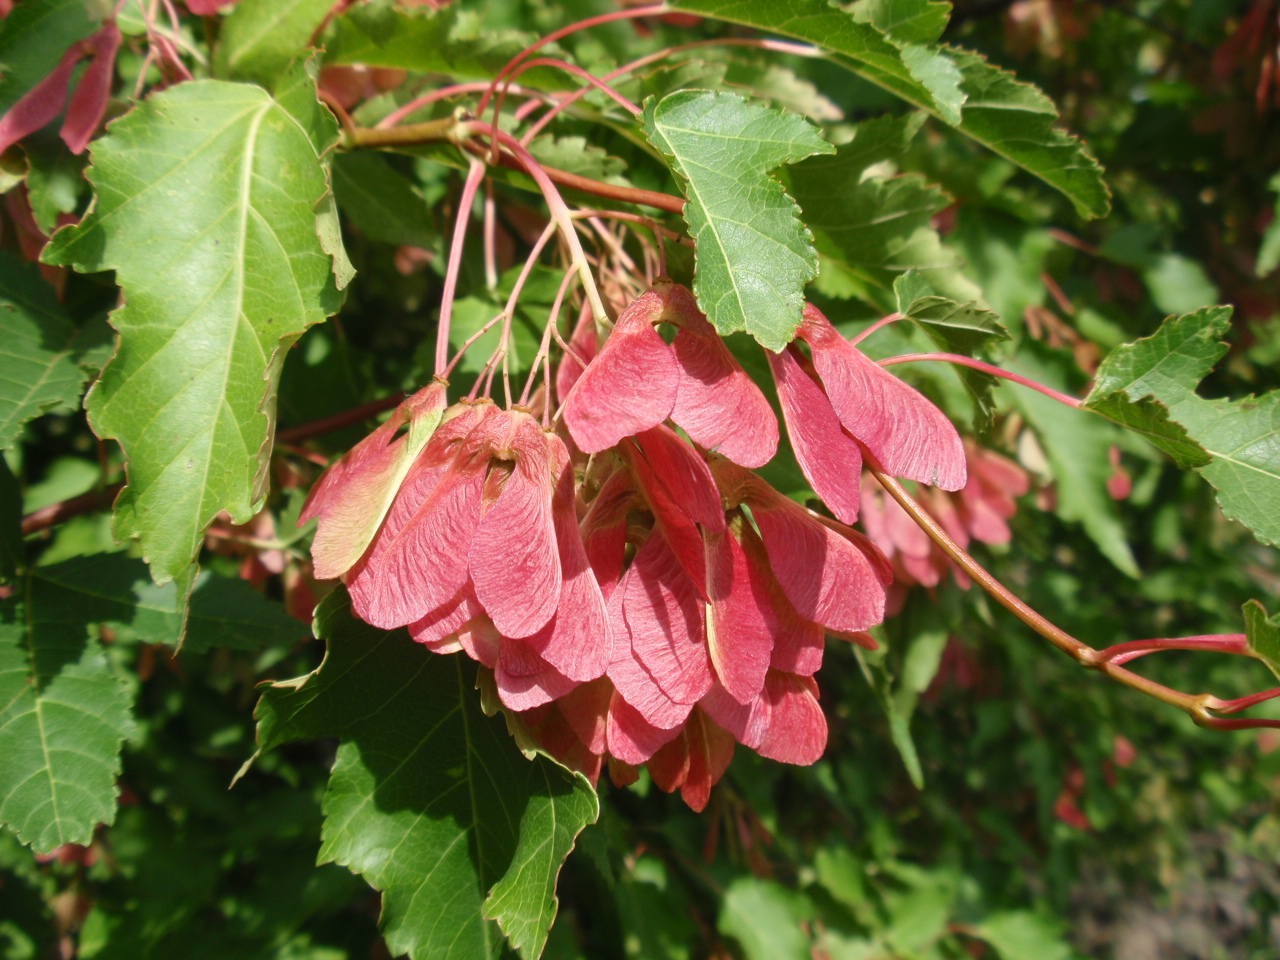 An image of the red, winged, fruits in the center of green tree leaves.